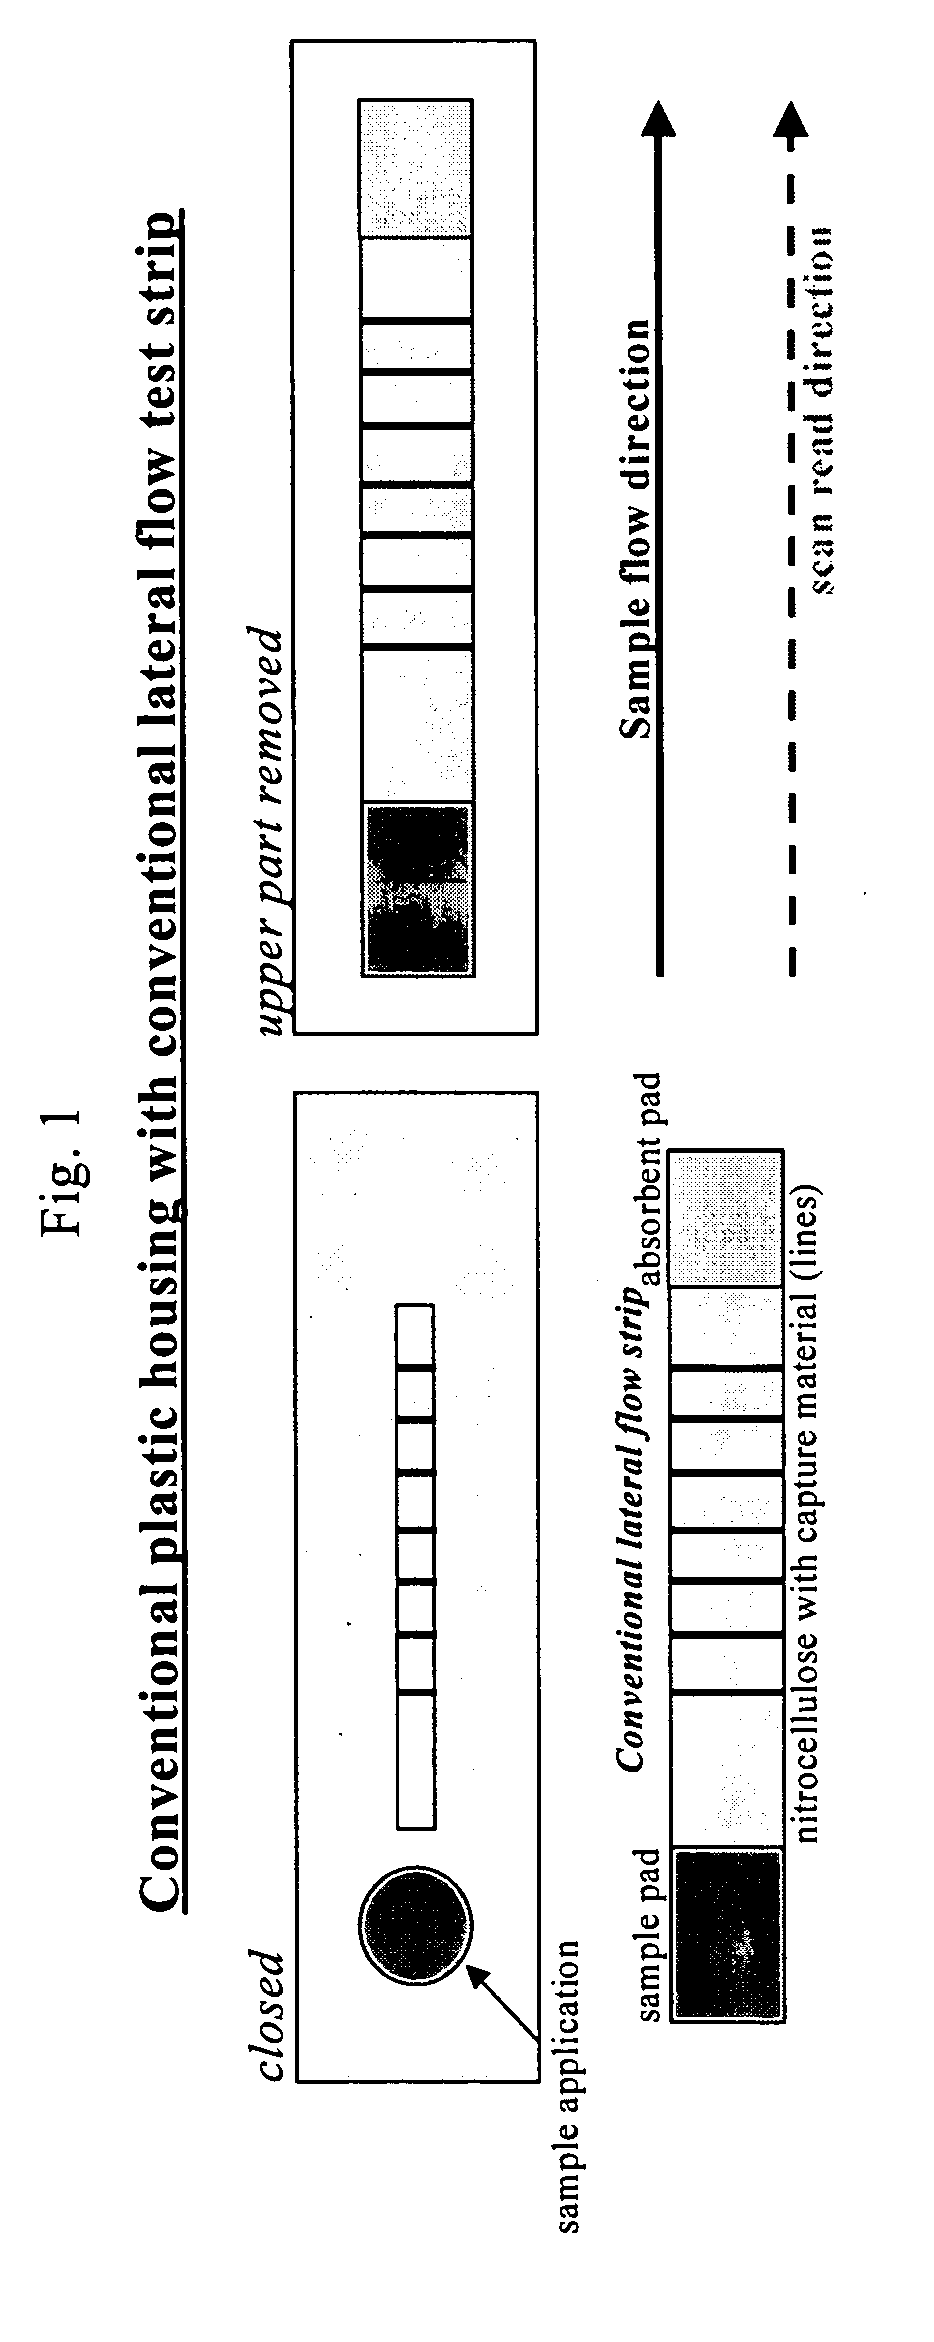 Lateral flow assay device with multiple equidistant capture zones